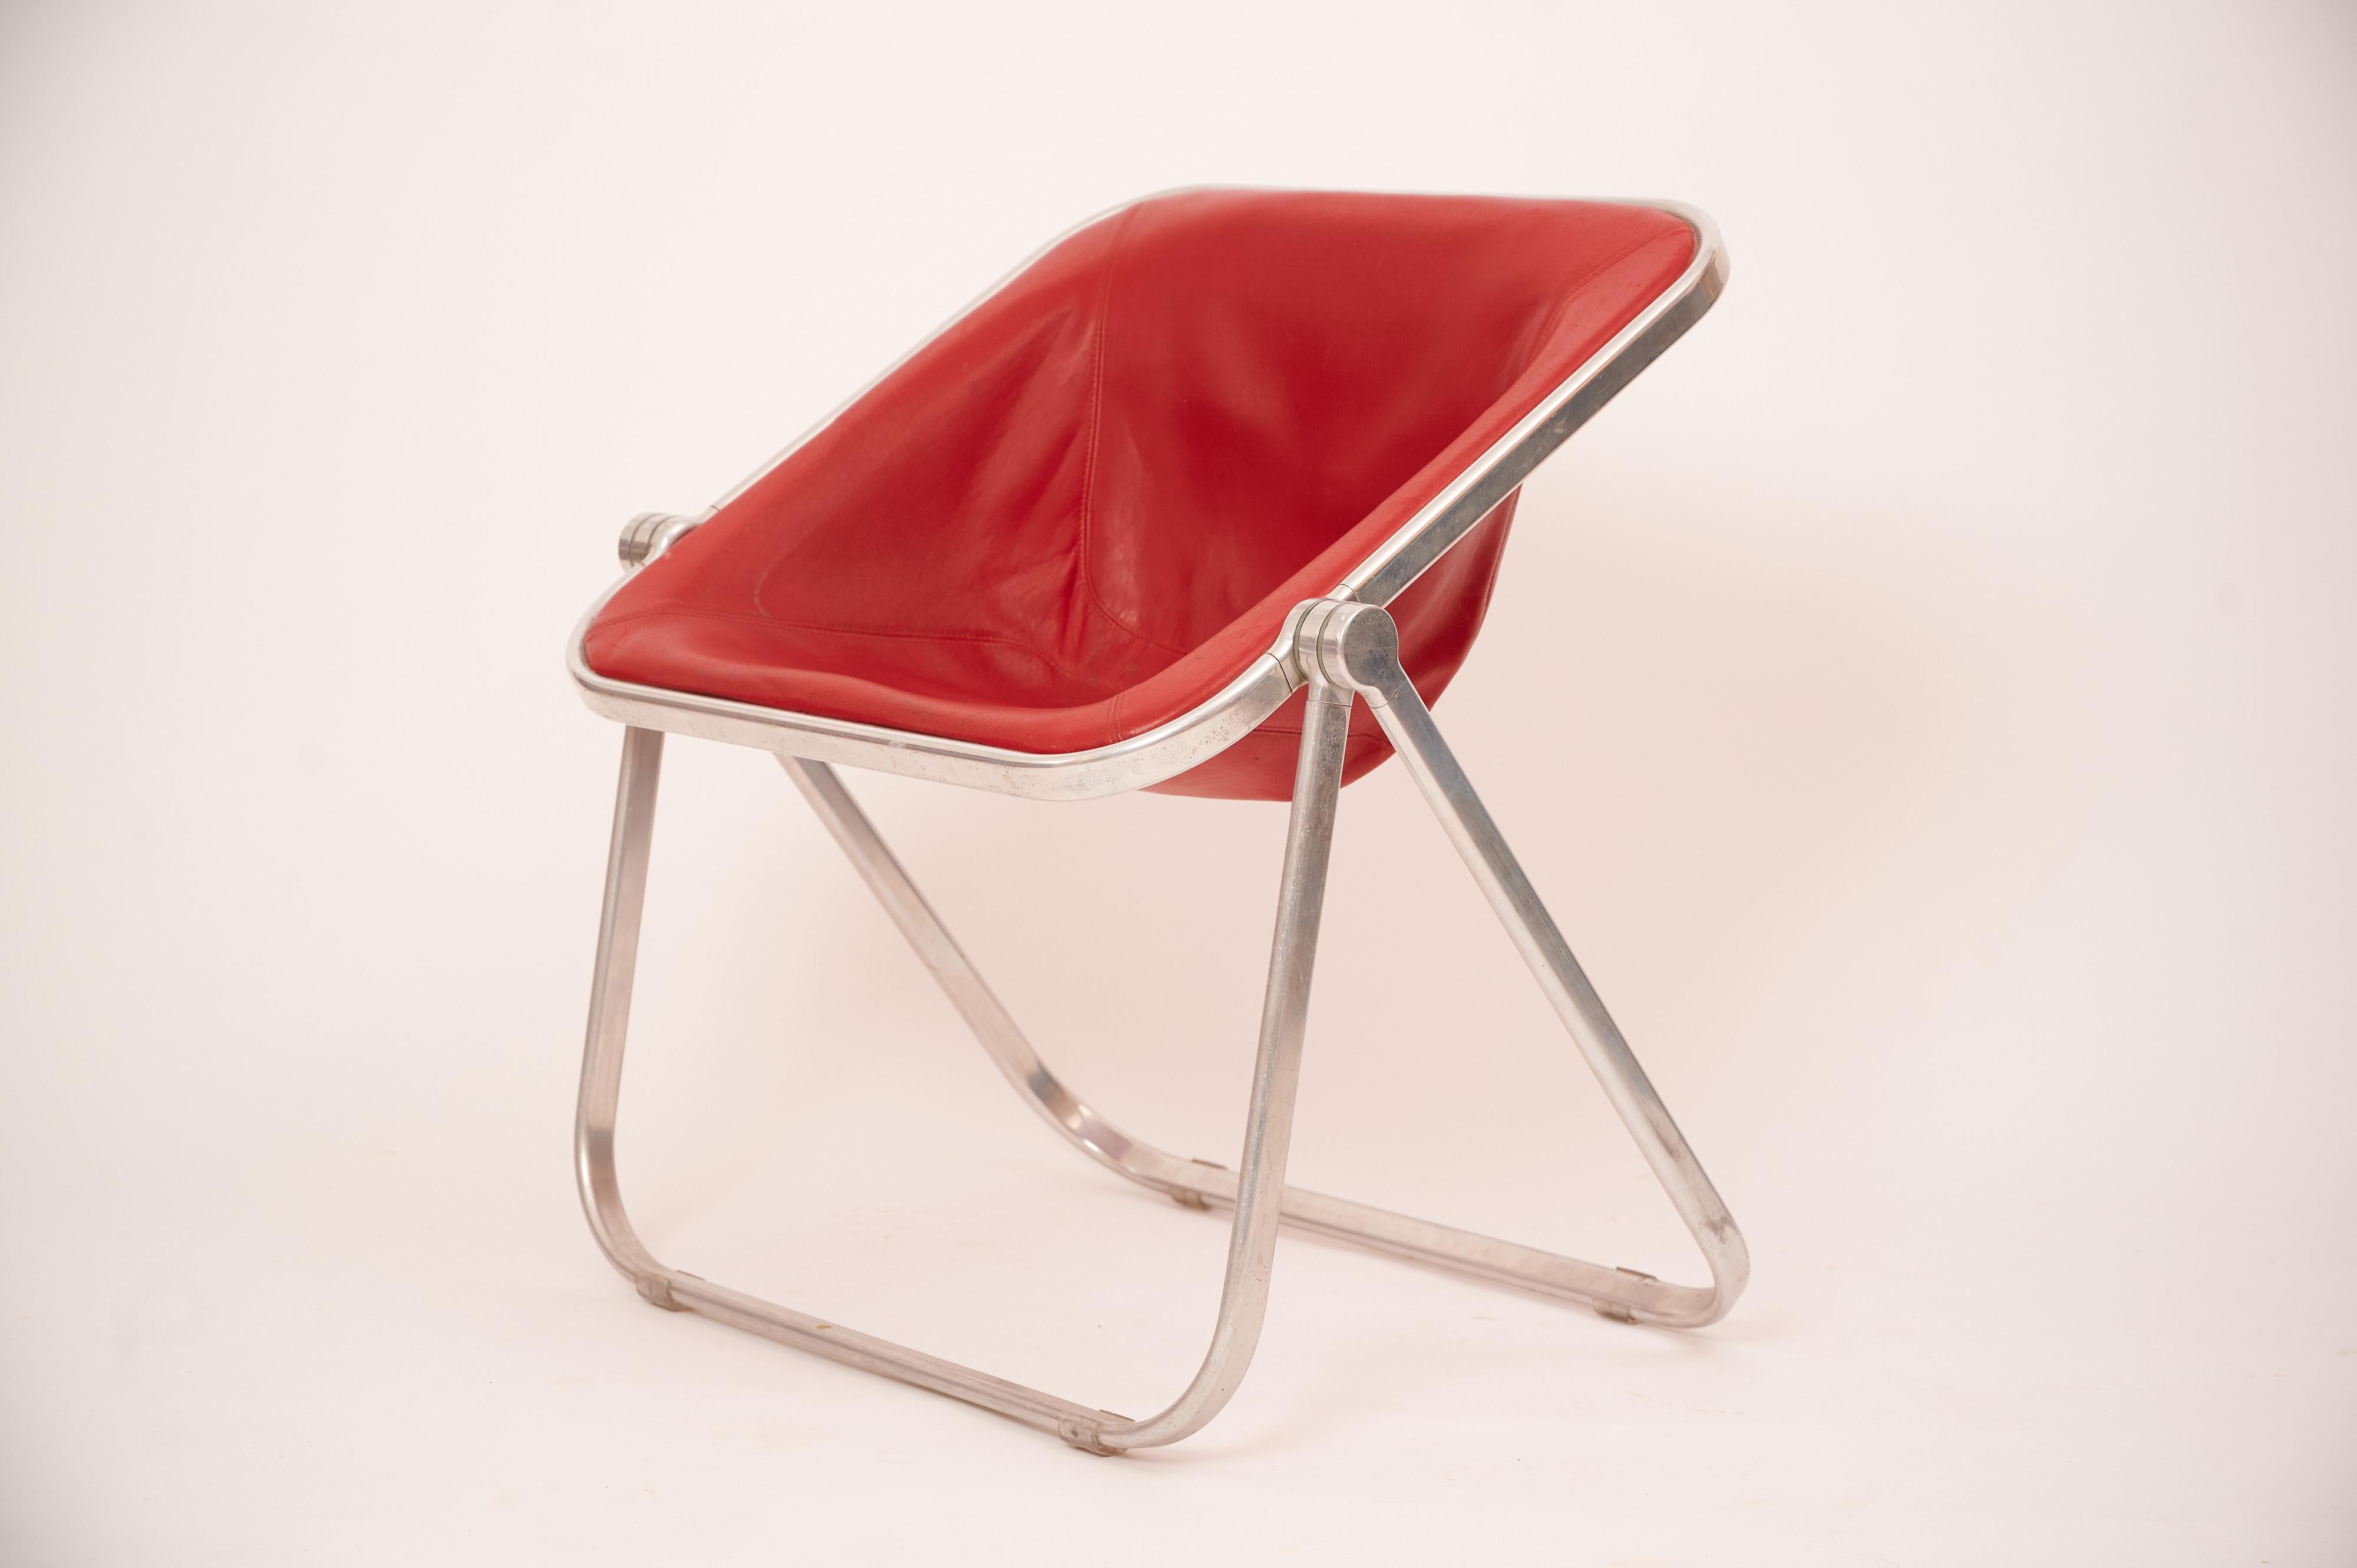 Mid-20th Century Pair of Plona Chairs in Red Leather by Giancarlo Piretti